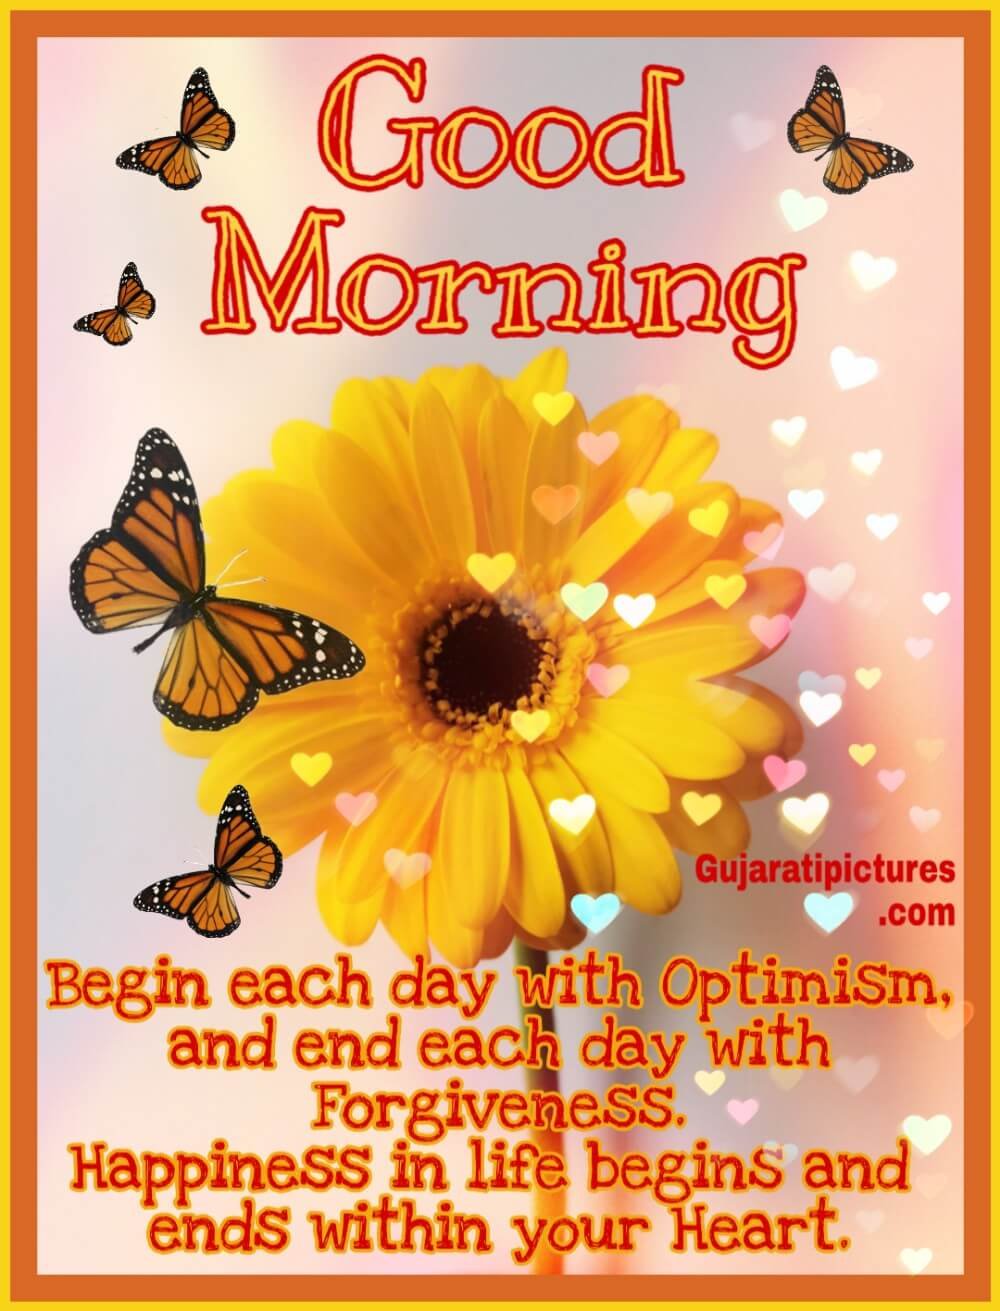 Good Morning Messages - Gujarati Pictures – Website Dedicated to ...